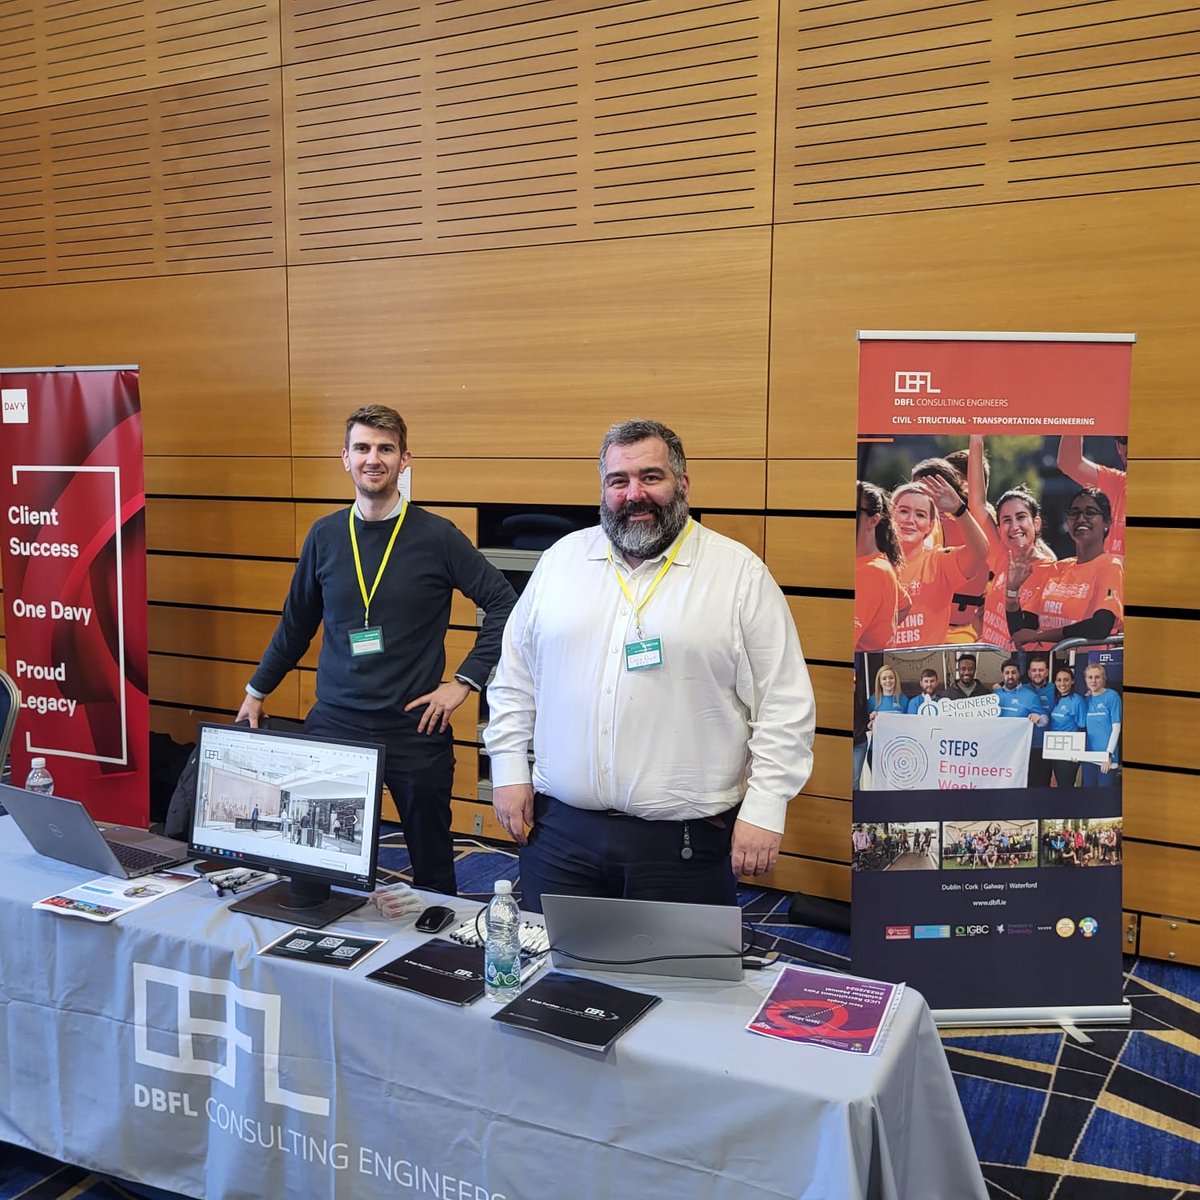 We are at the @ucddublin Internship Fair today. Come visit the DBFL stand between 12 and 4pm in UCD O’Reilly Hall, Belfield Campus to find out more about our internship and graduate opportunities. dbfl.ie/dbfl-internshi… #InternshipOpportunities #HiringEvent